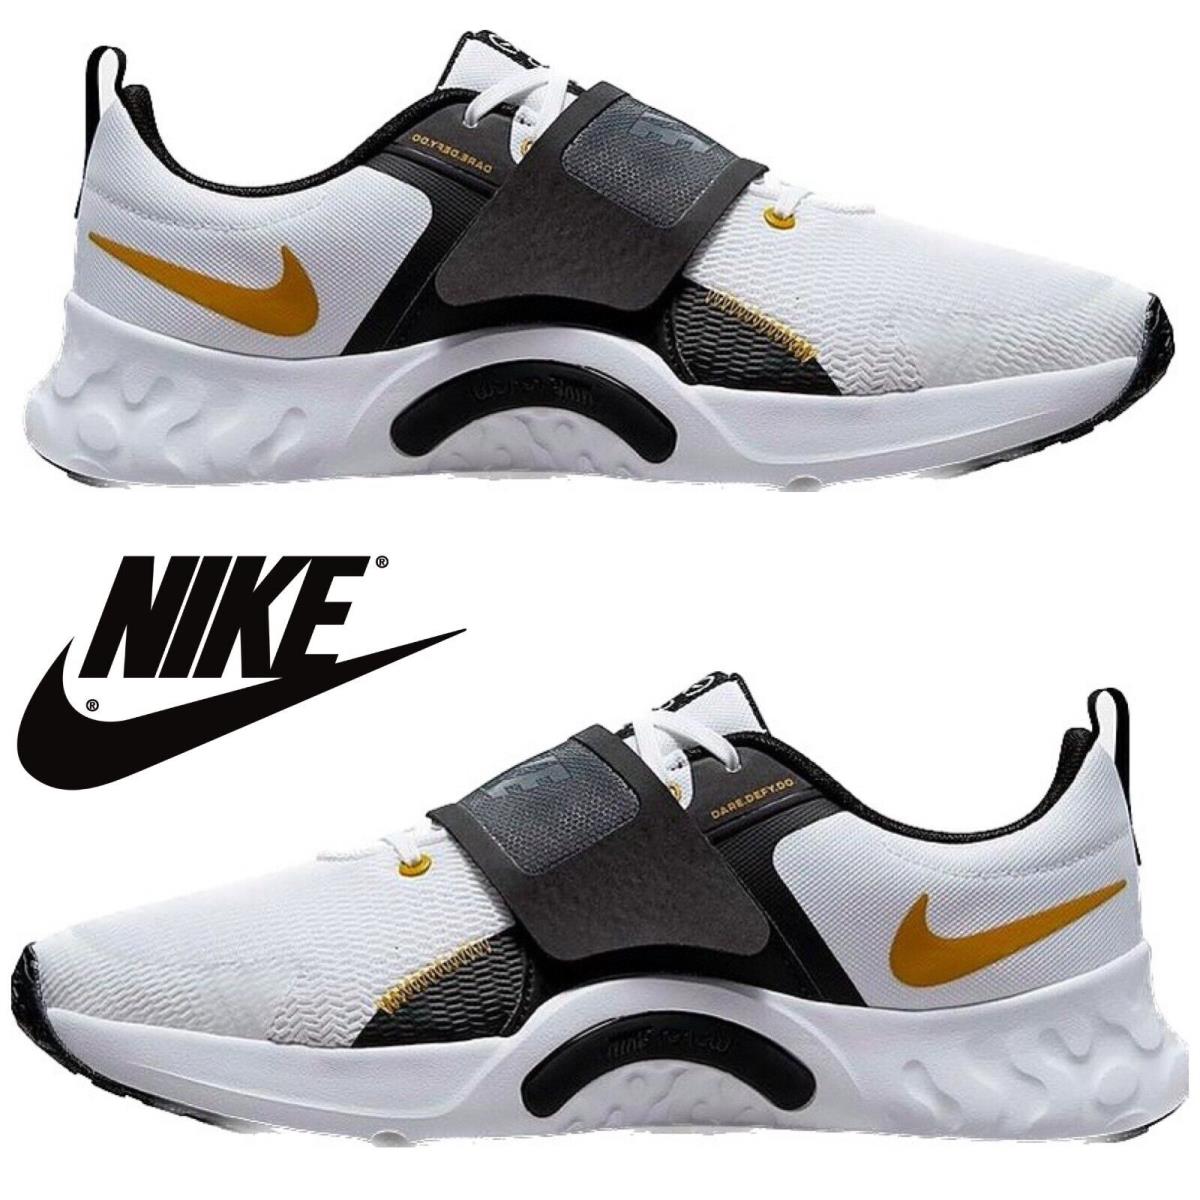 Nike Renew Retaliation 4 Men`s Sneakers Casual Gym Athletic Comfort Sport Shoes - White , White/Black/Gold Suede Manufacturer